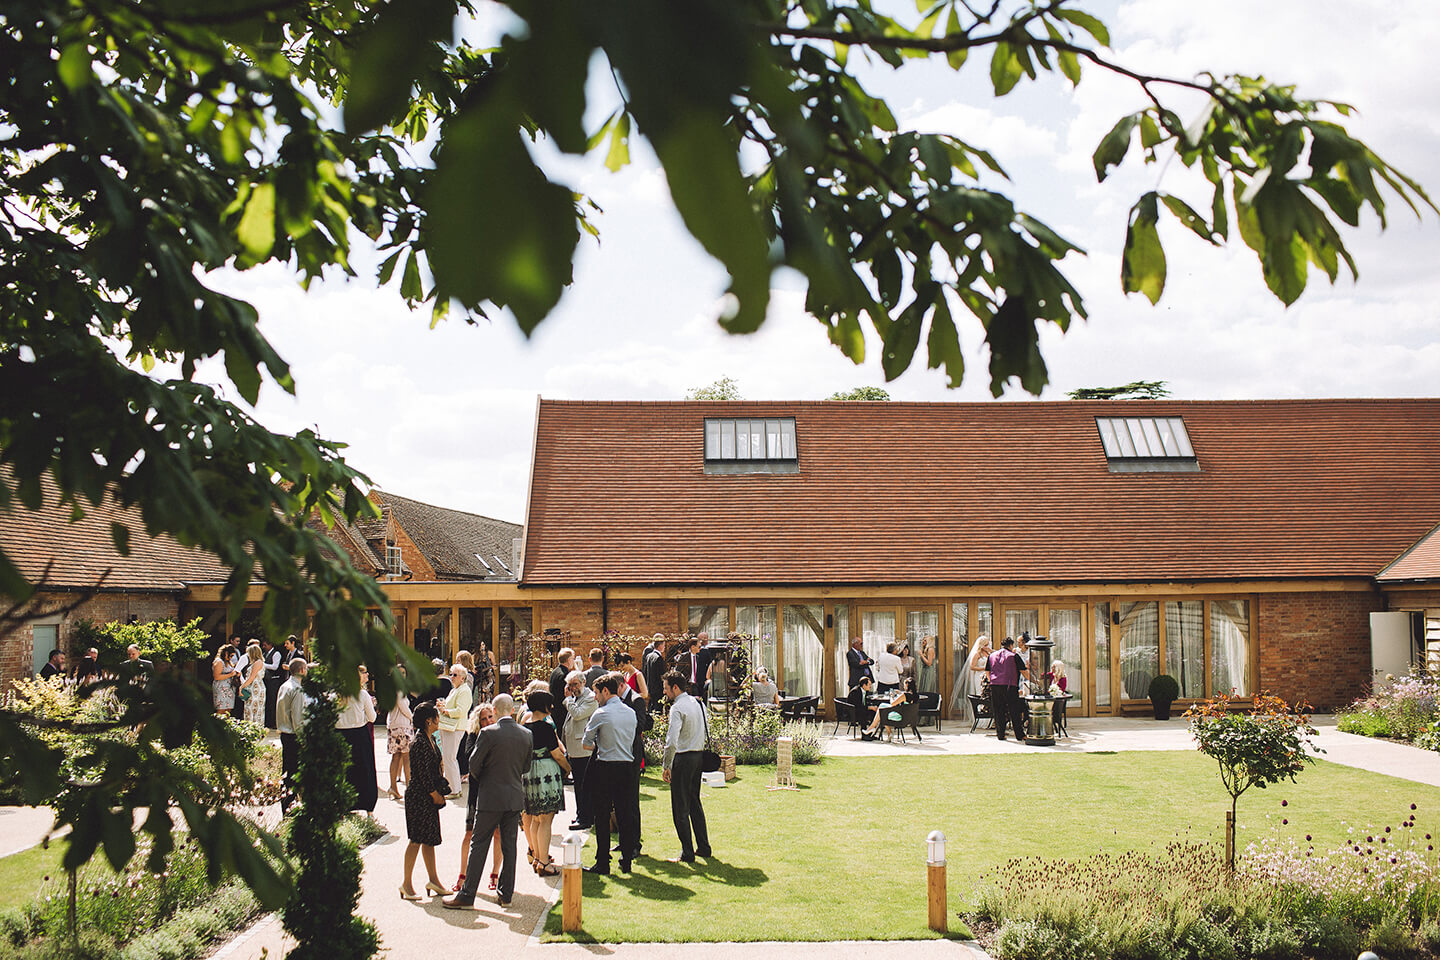 Guests mingle and enjoy drinks and canapes in the gardens after the wedding ceremony